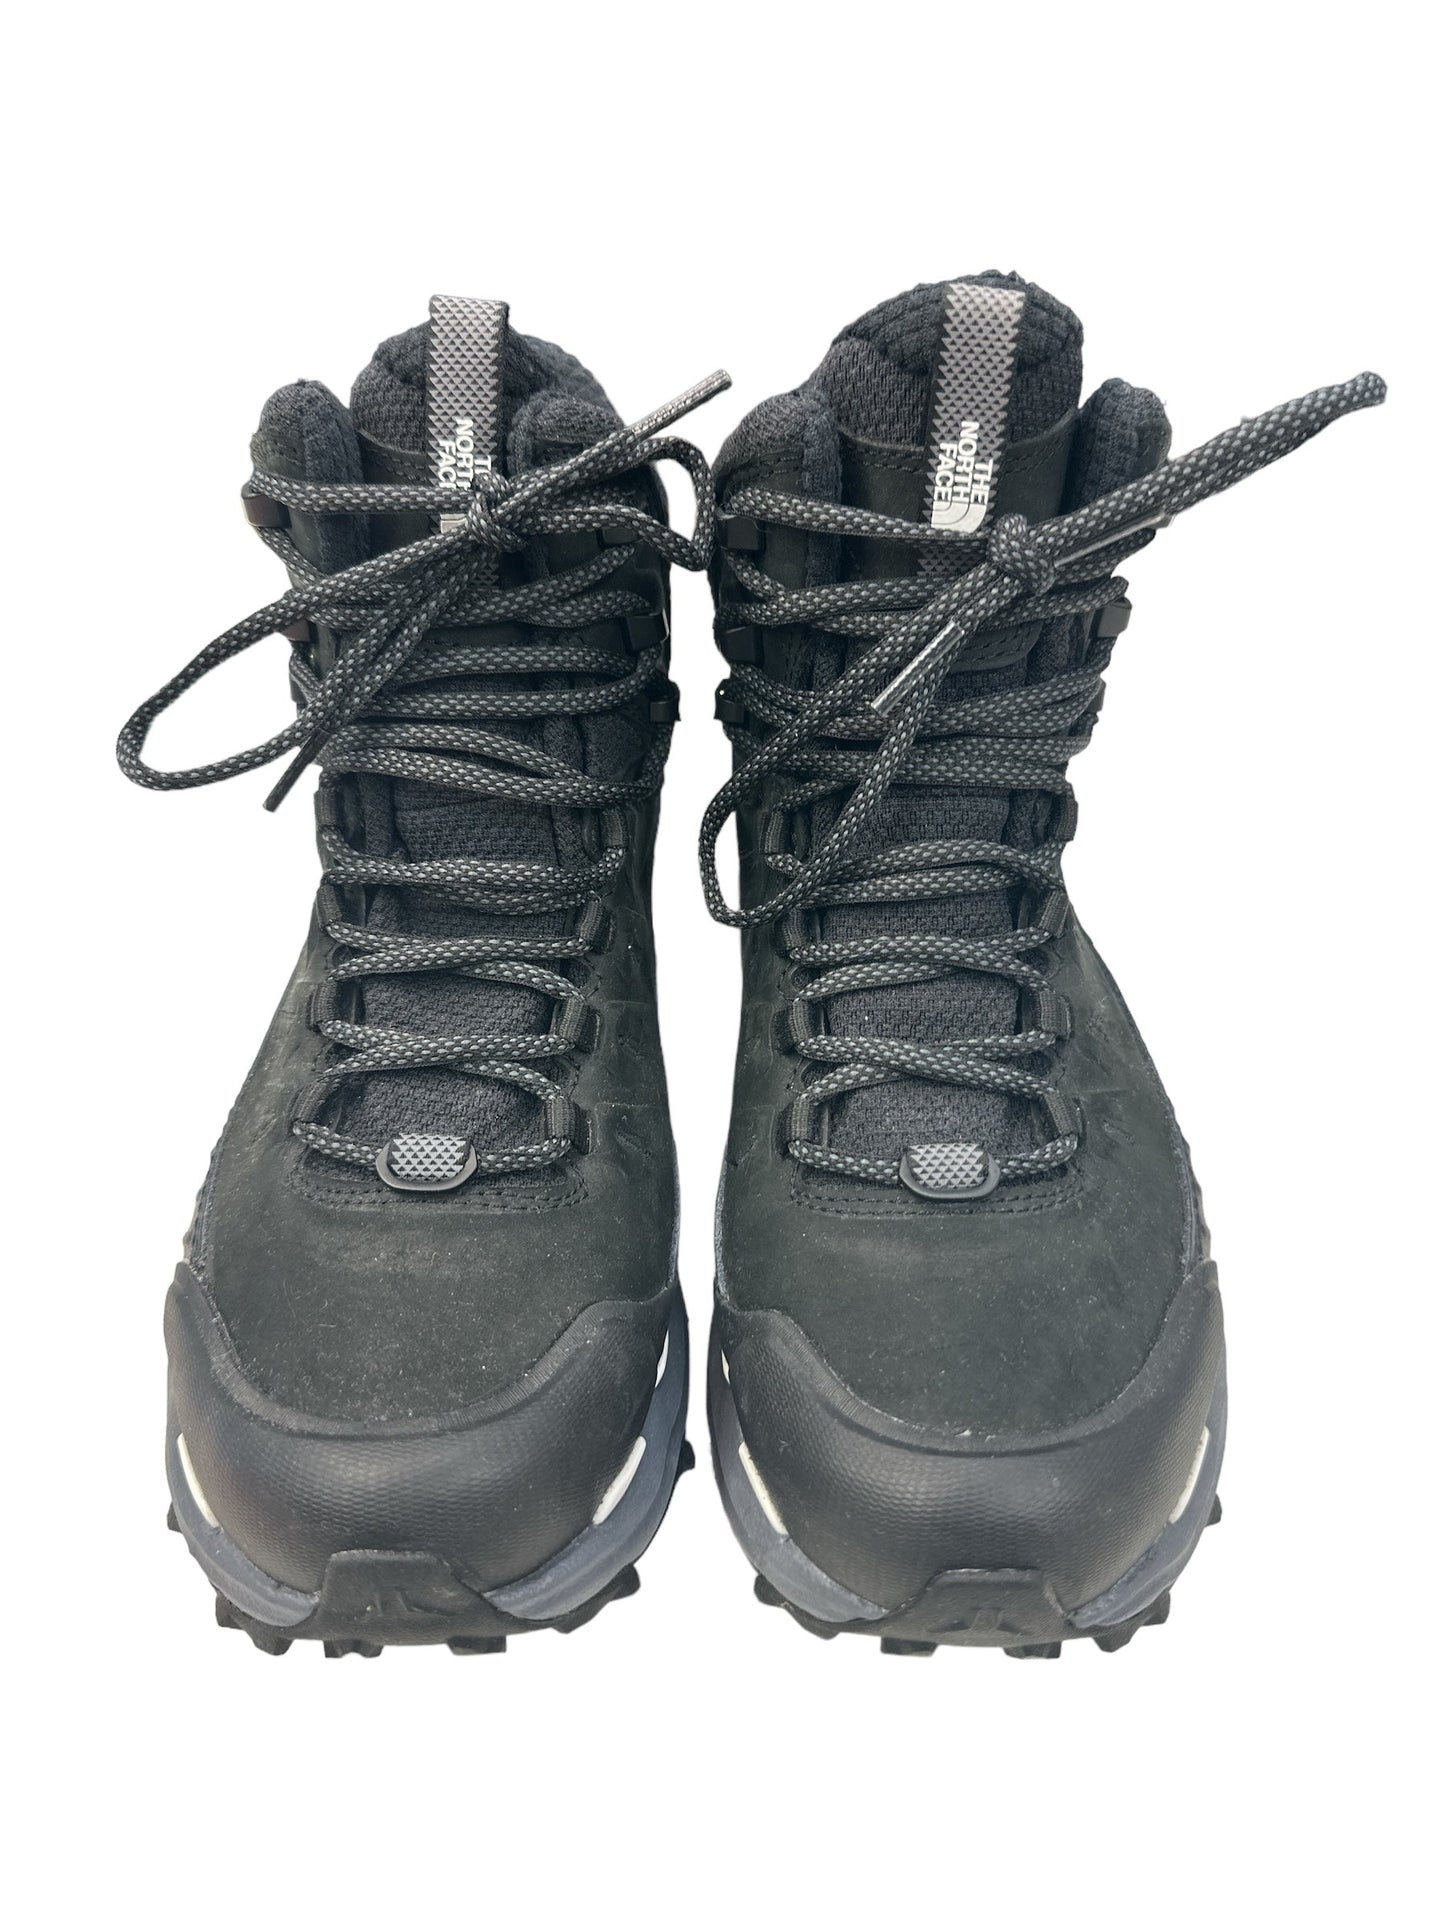 Black Boots Hiking The North Face, Size 7.5